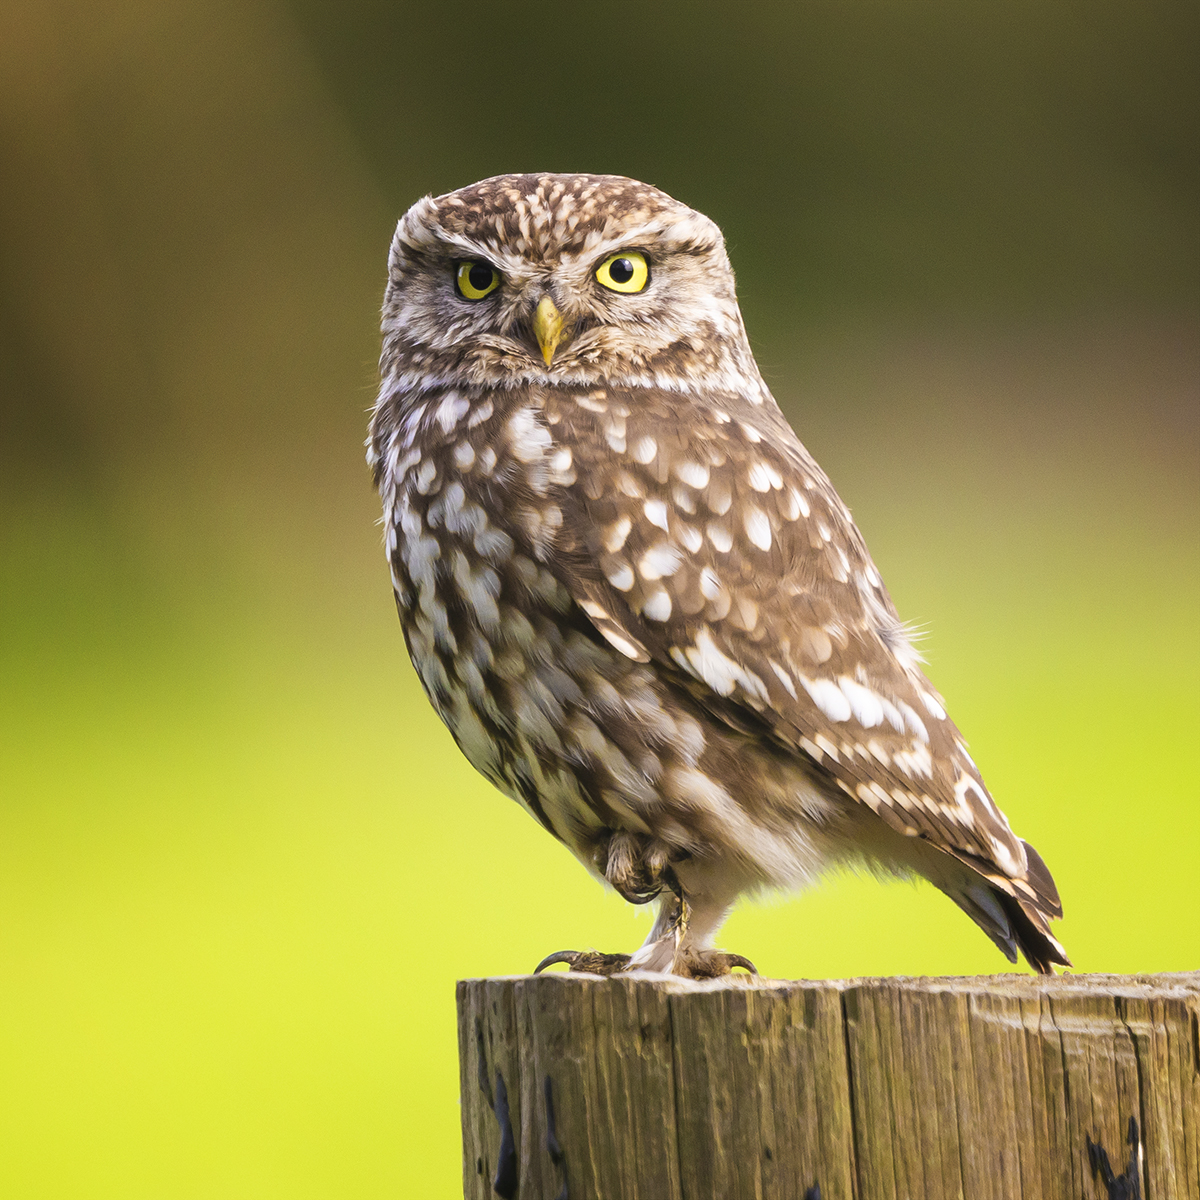 Check out this Little Owl's false face on the back of it's head! A defence against predators, who will think the Owl is always watching justwildimages.blogspot.com #BirdPhotography #BirdWatchers #FeatheredFriends #AvianBeauty #WildlifePhotography #BirdingAdventures #NatureCaptures